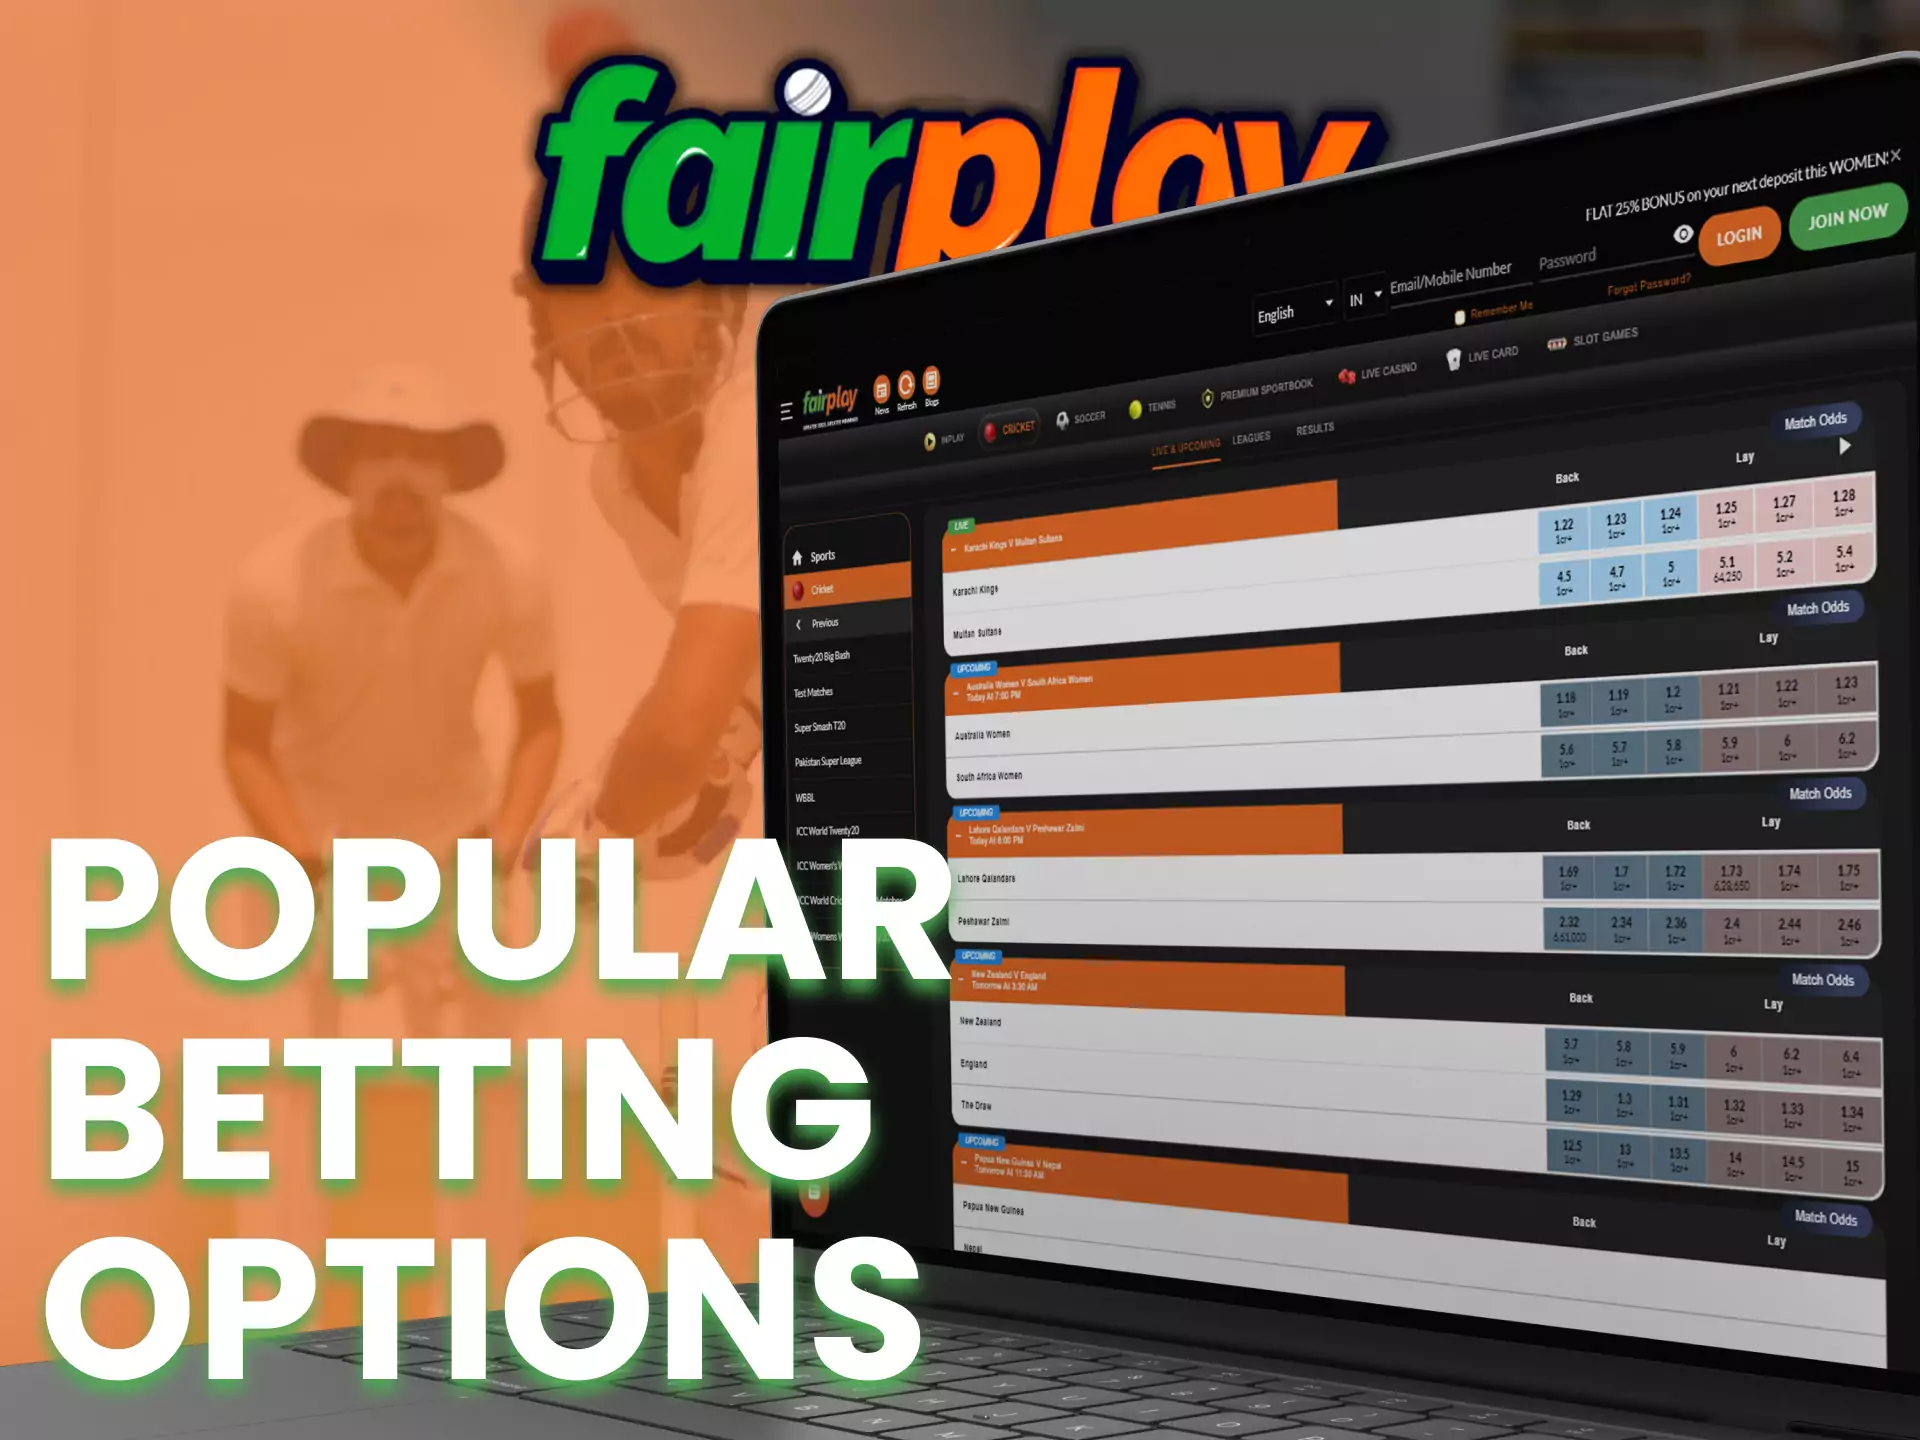 On Fairplay try different options for sports betting.